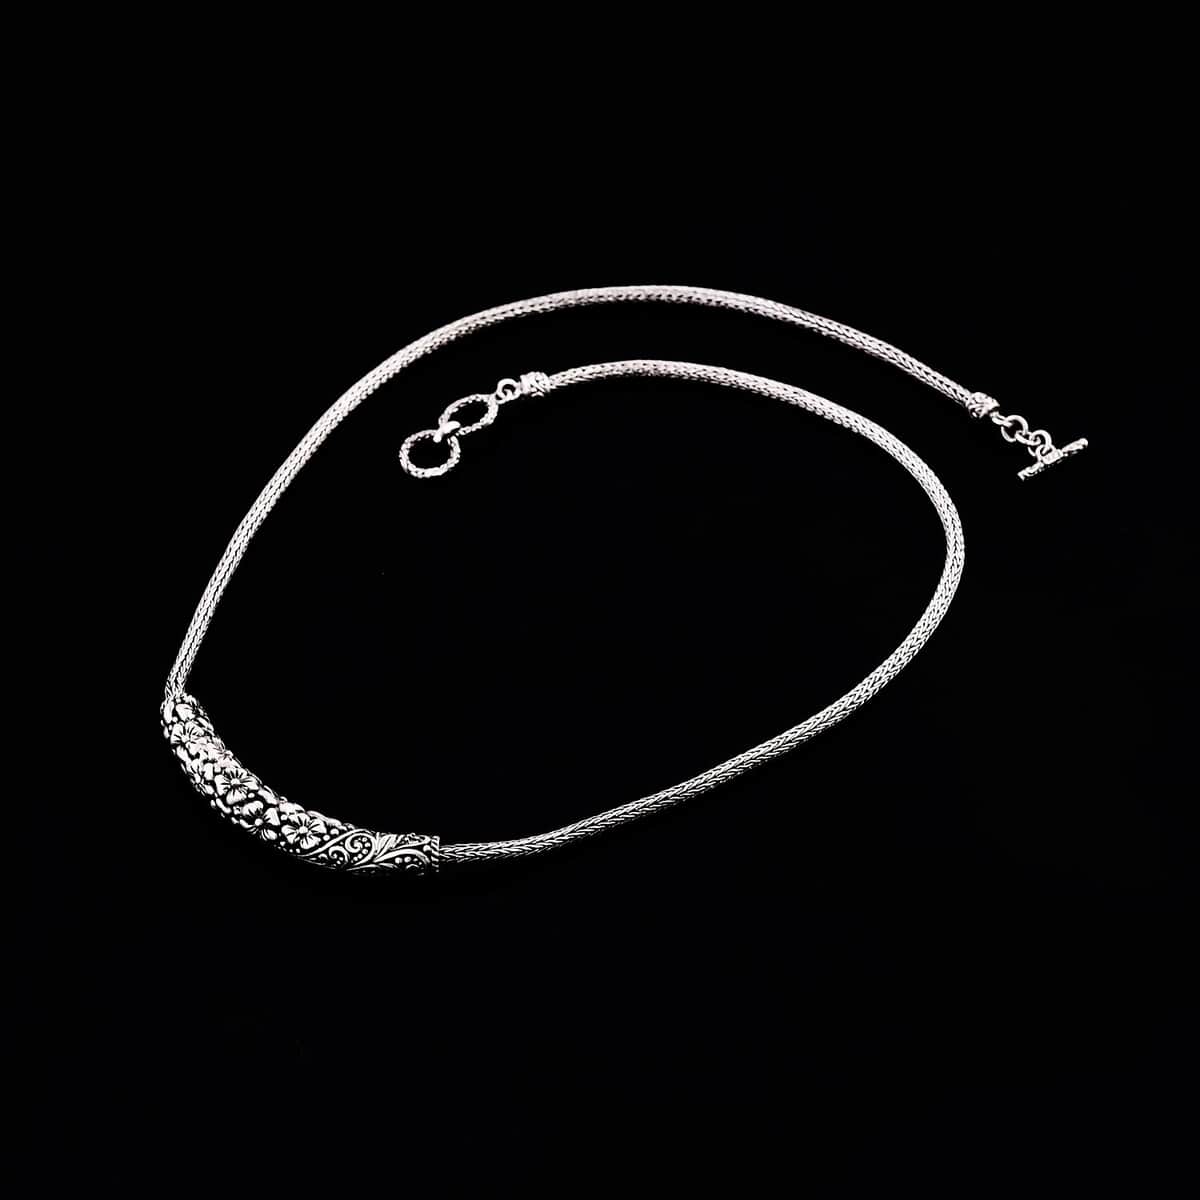 Bali Legacy Sterling Silver Frangipani with Filigree Necklace 18-19 Inches 21 Grams image number 1